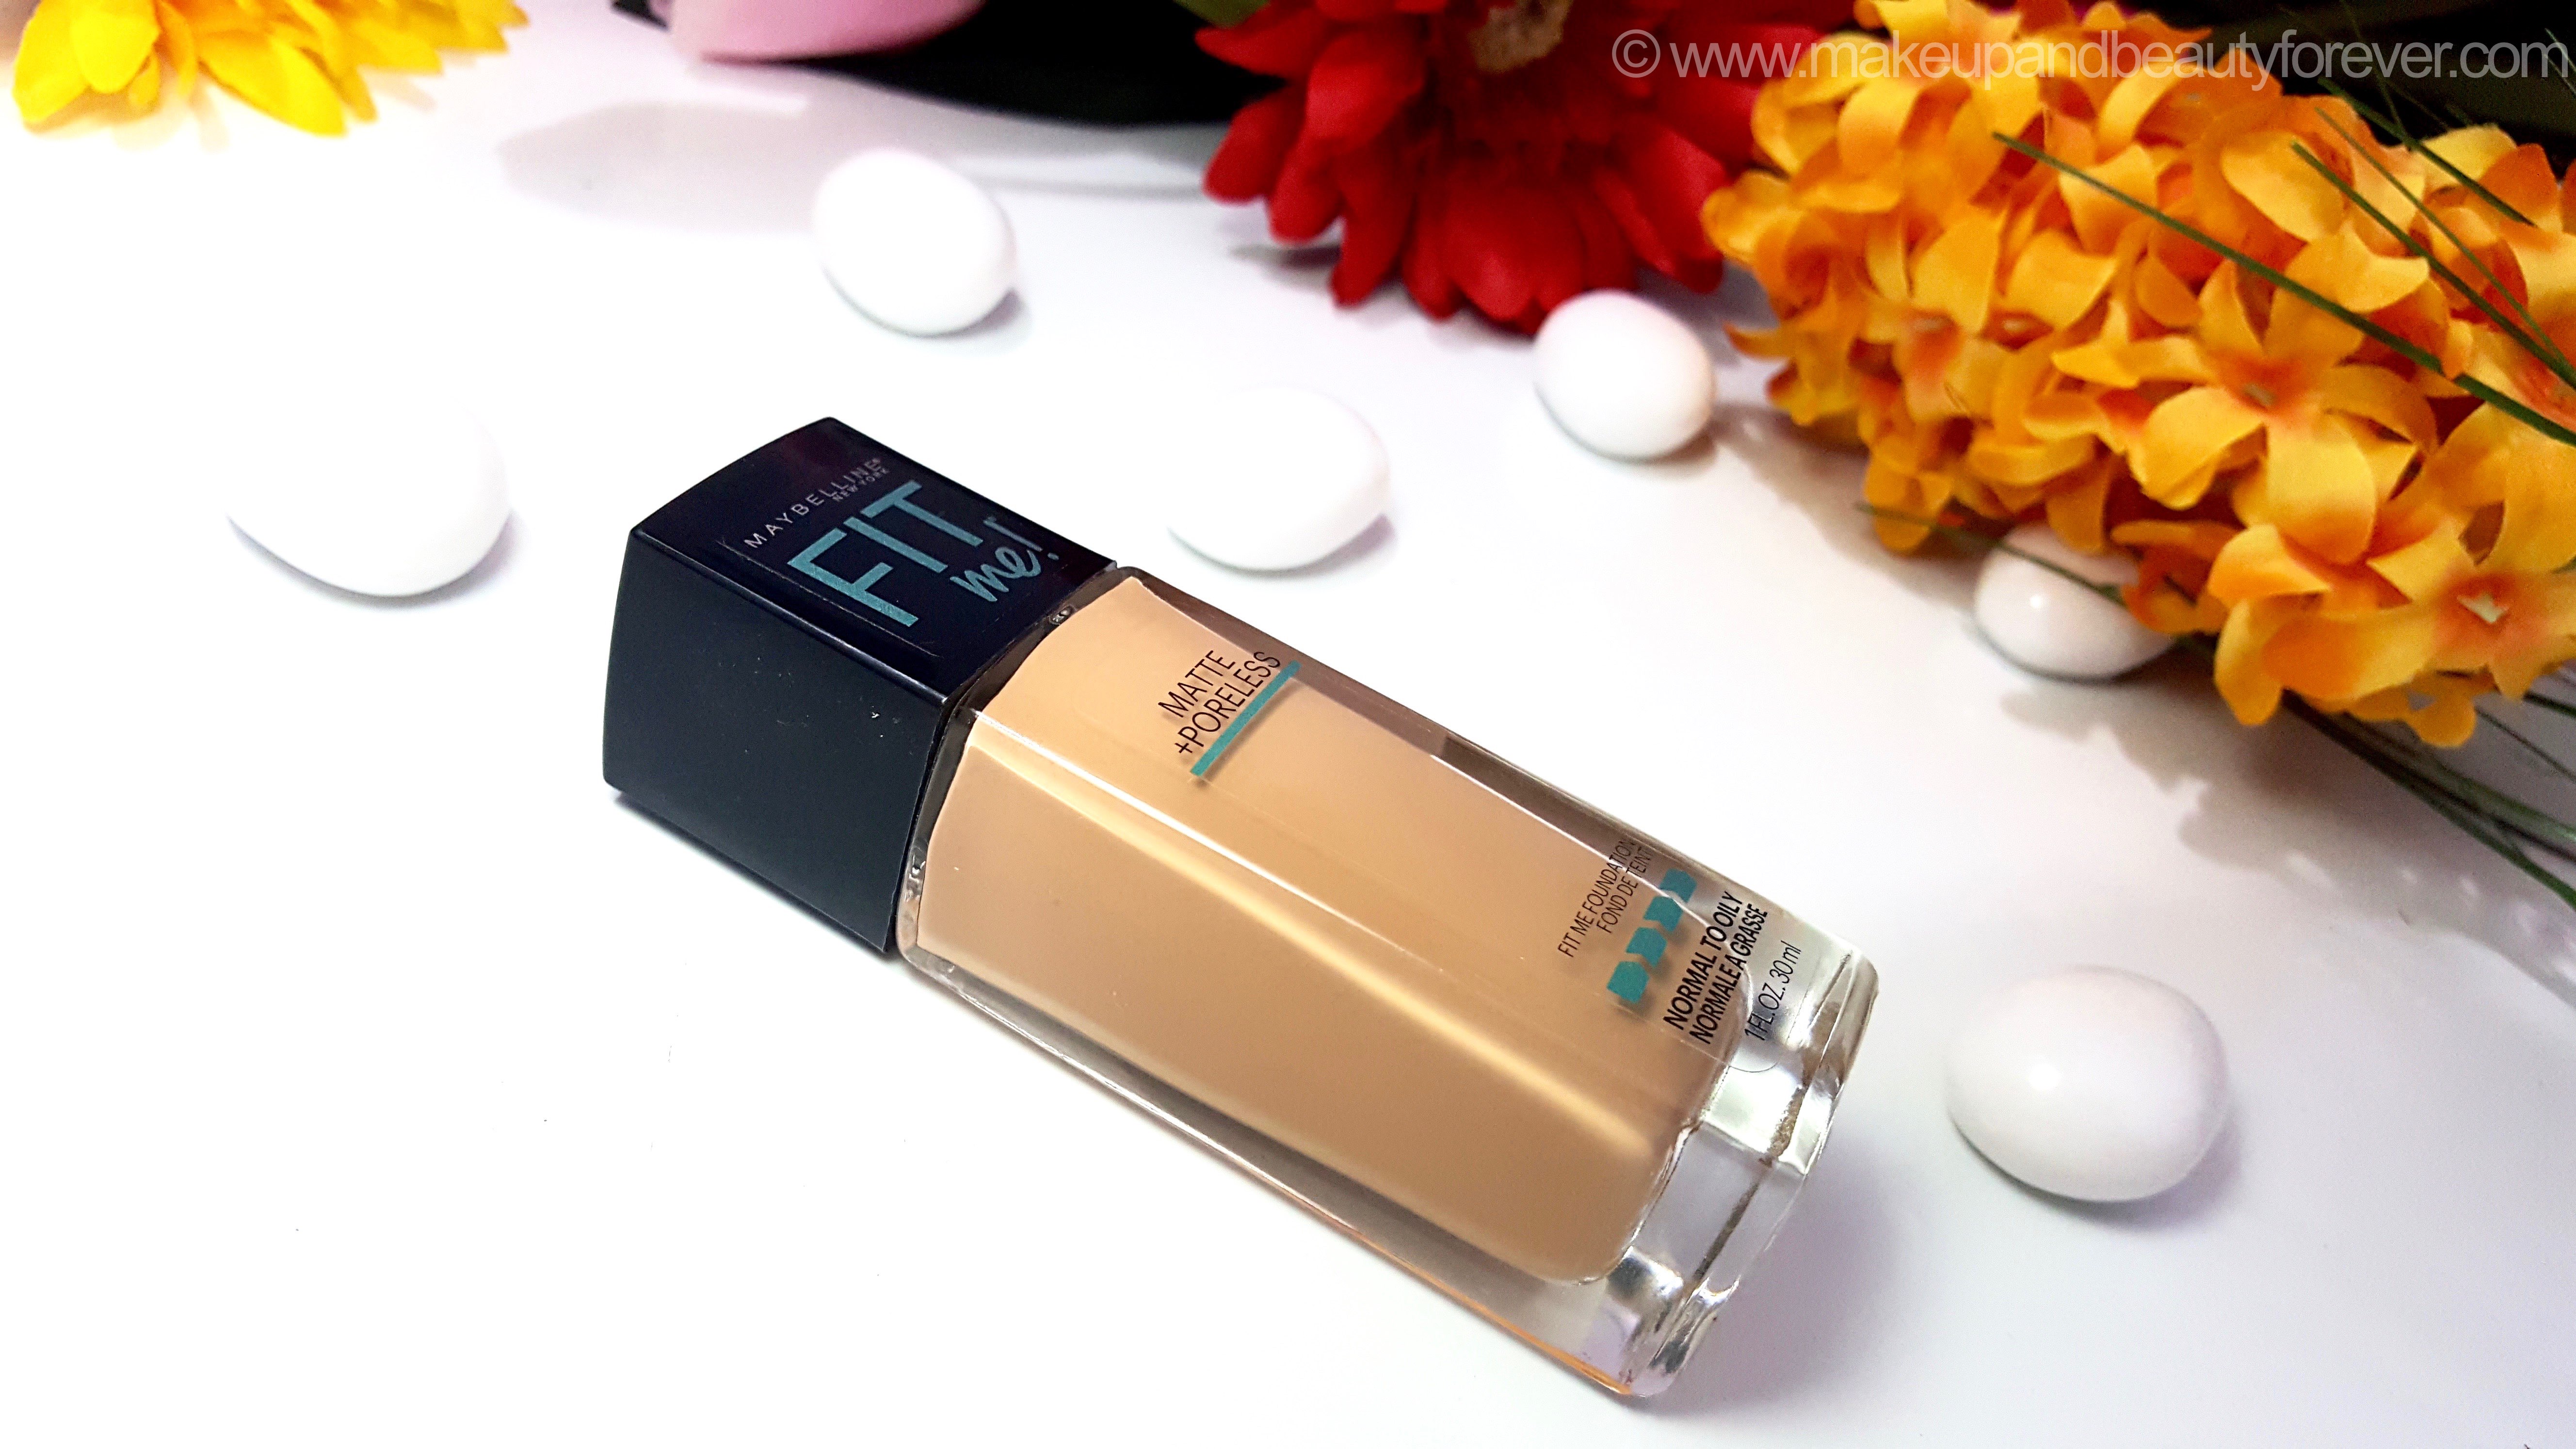 maybelline fit me foundation color match to mac